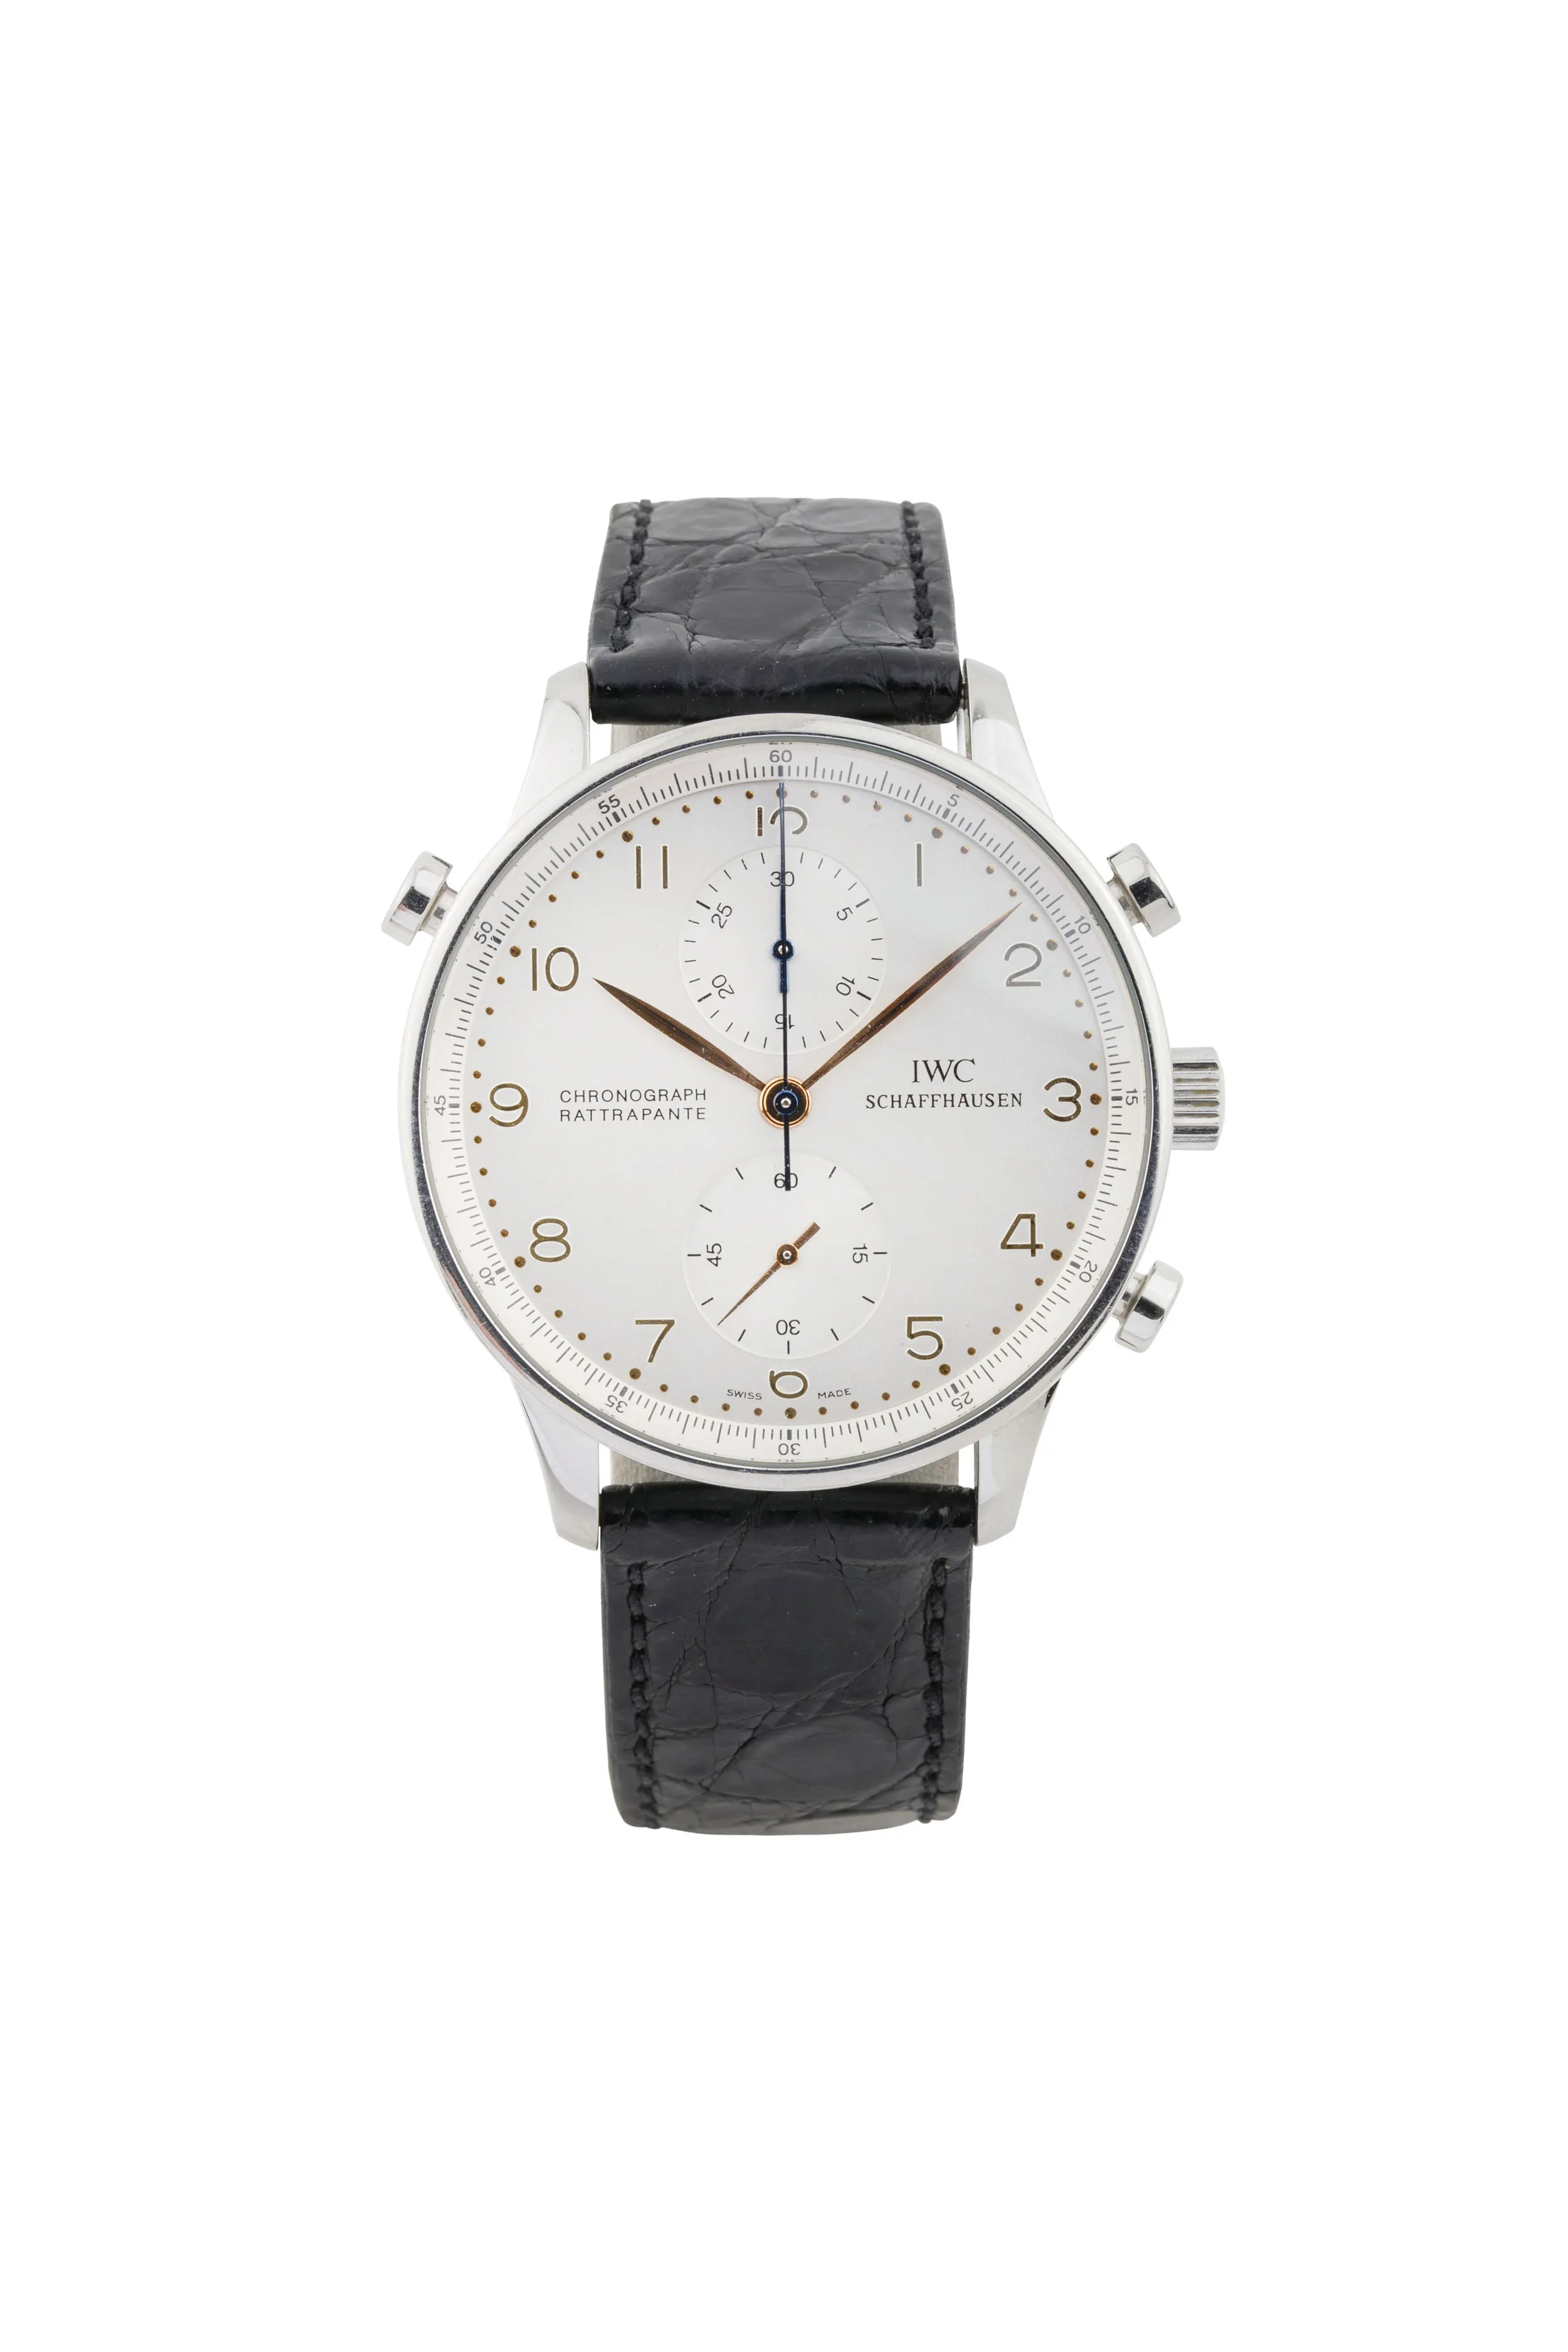 IWC Portugieser 3712-002 40mm Stainless steel